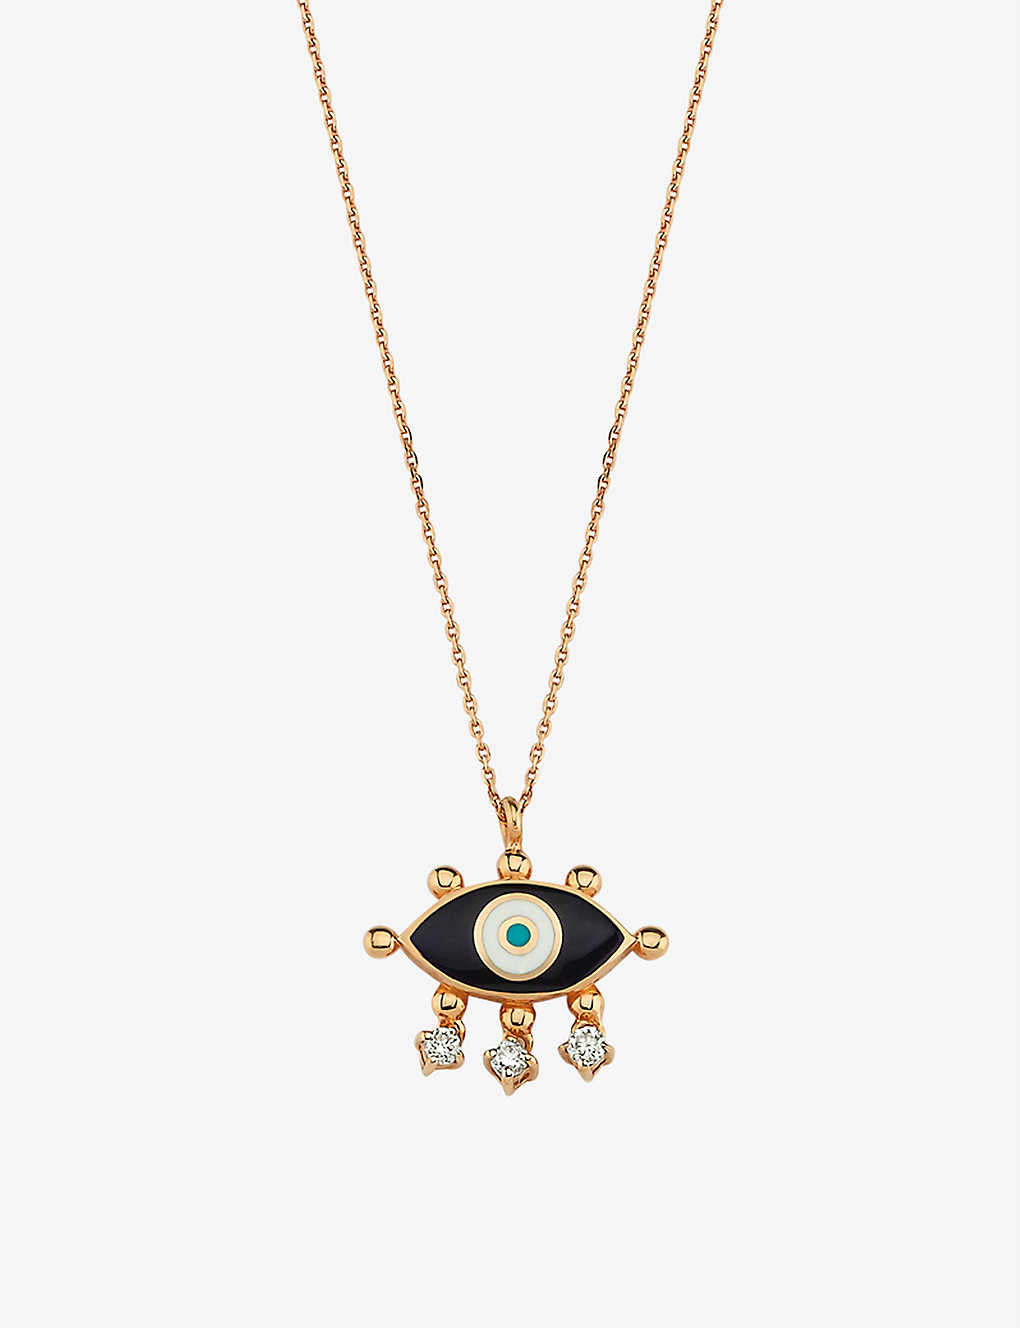 La Maison Couture Selda Jewellery Evil Eye 14ct Rose-gold, 0.08ct Diamond And Enamel Pendant Necklace In Navy Blue